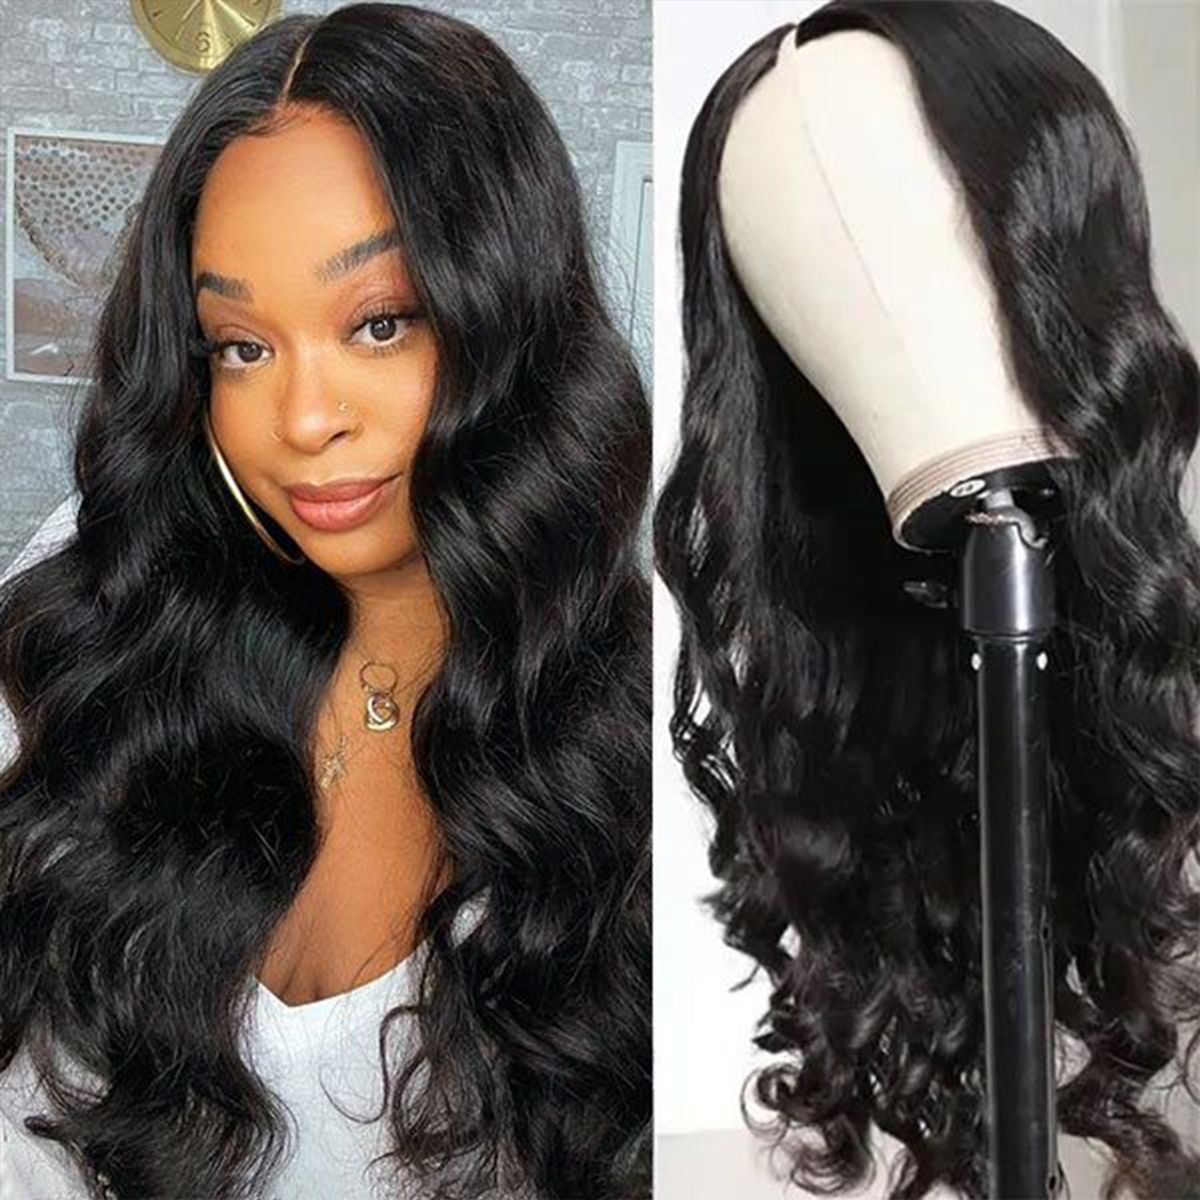 Body Wave Glueless Thin Part Wig V Part Wig Human Hair Wigs Wear And Go Wig